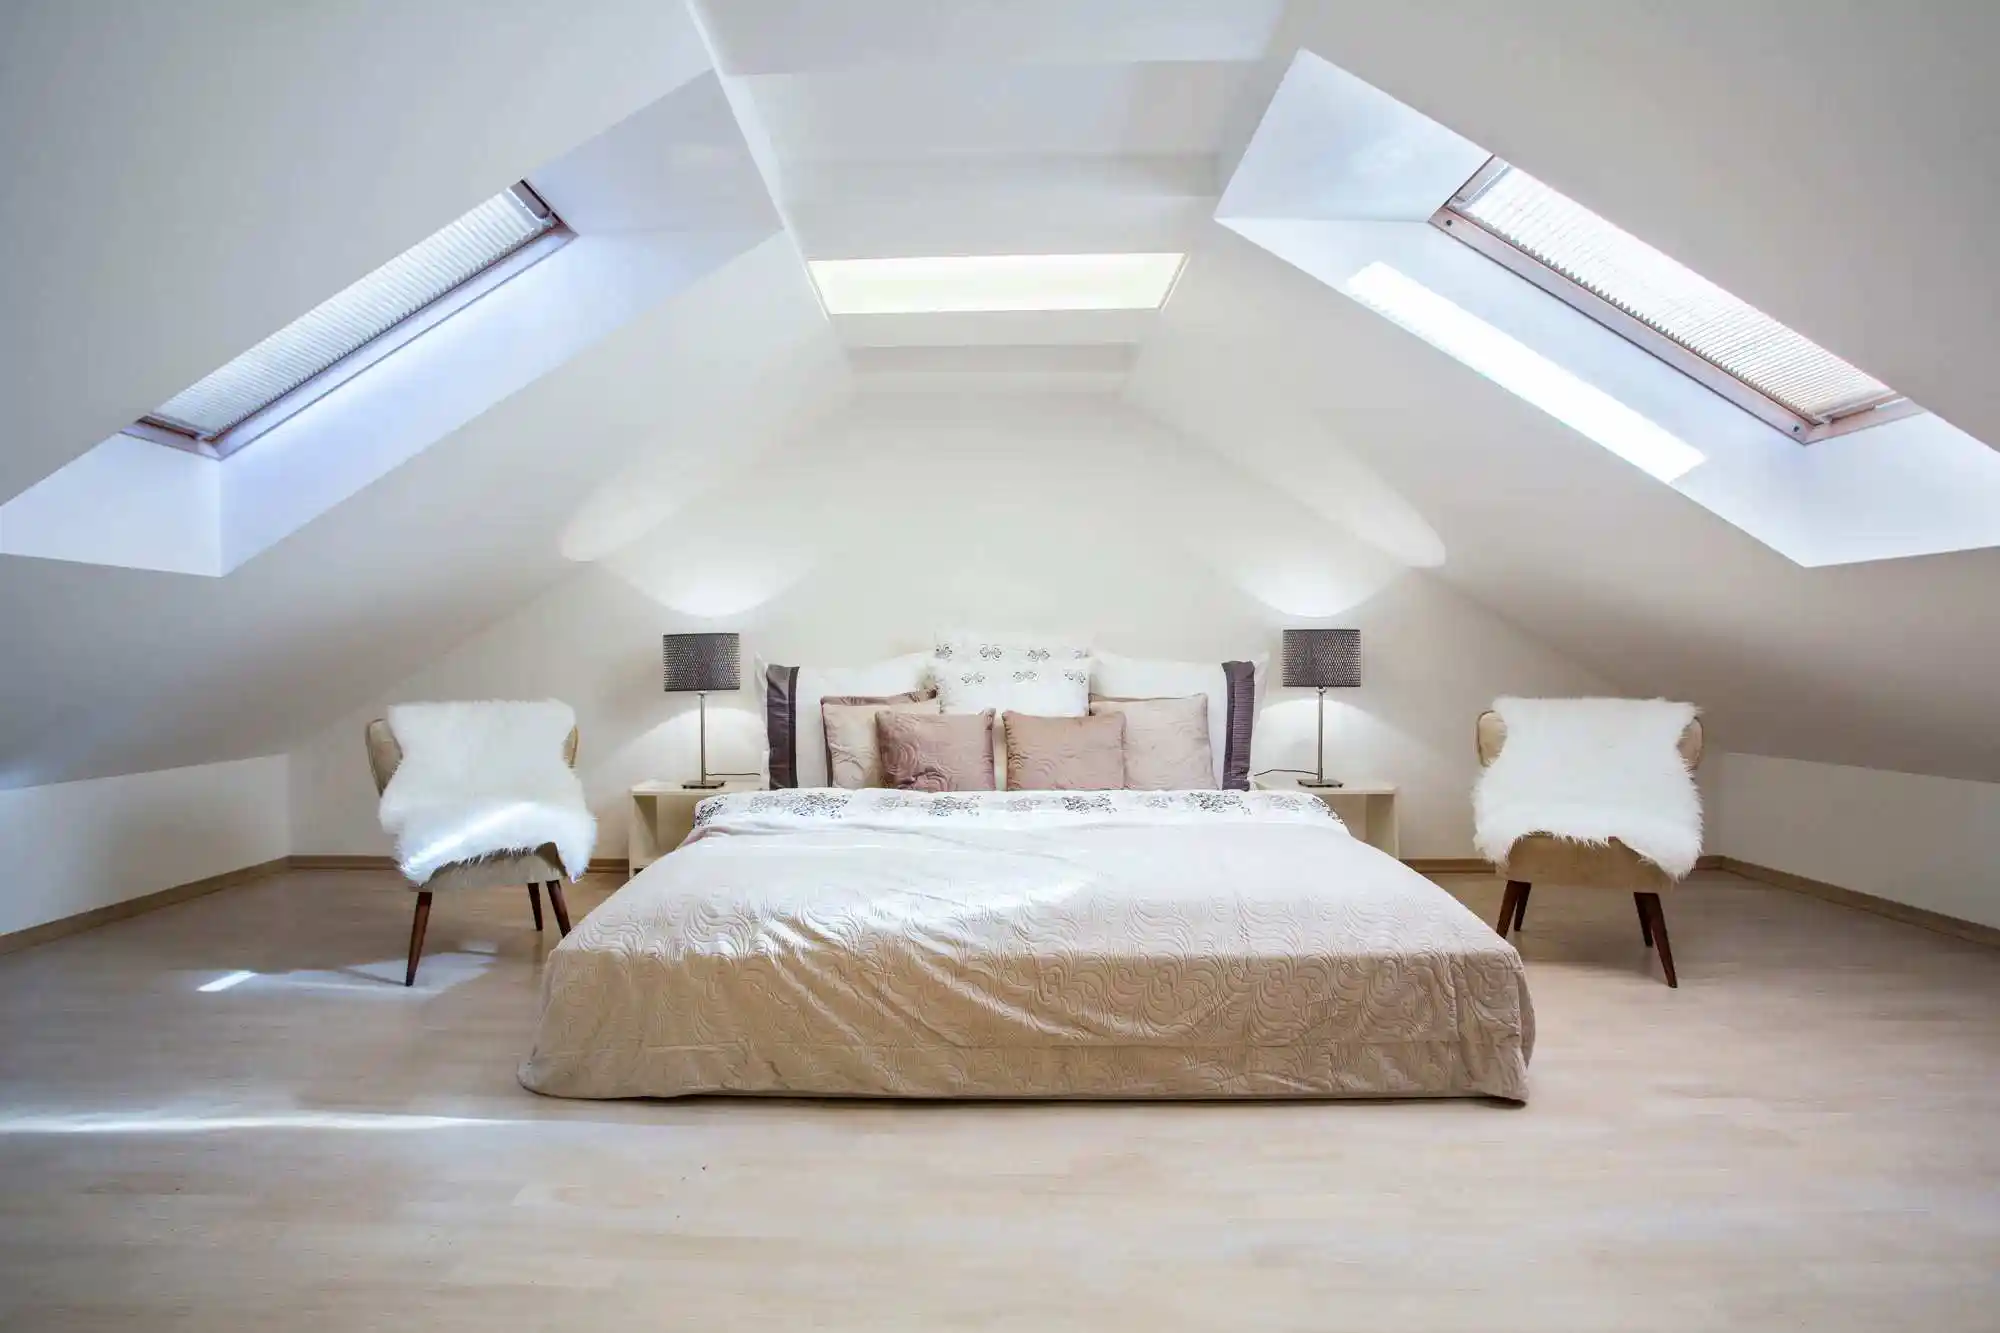 The Ultimate Guide to Choosing the Perfect Roof Window for Your Space